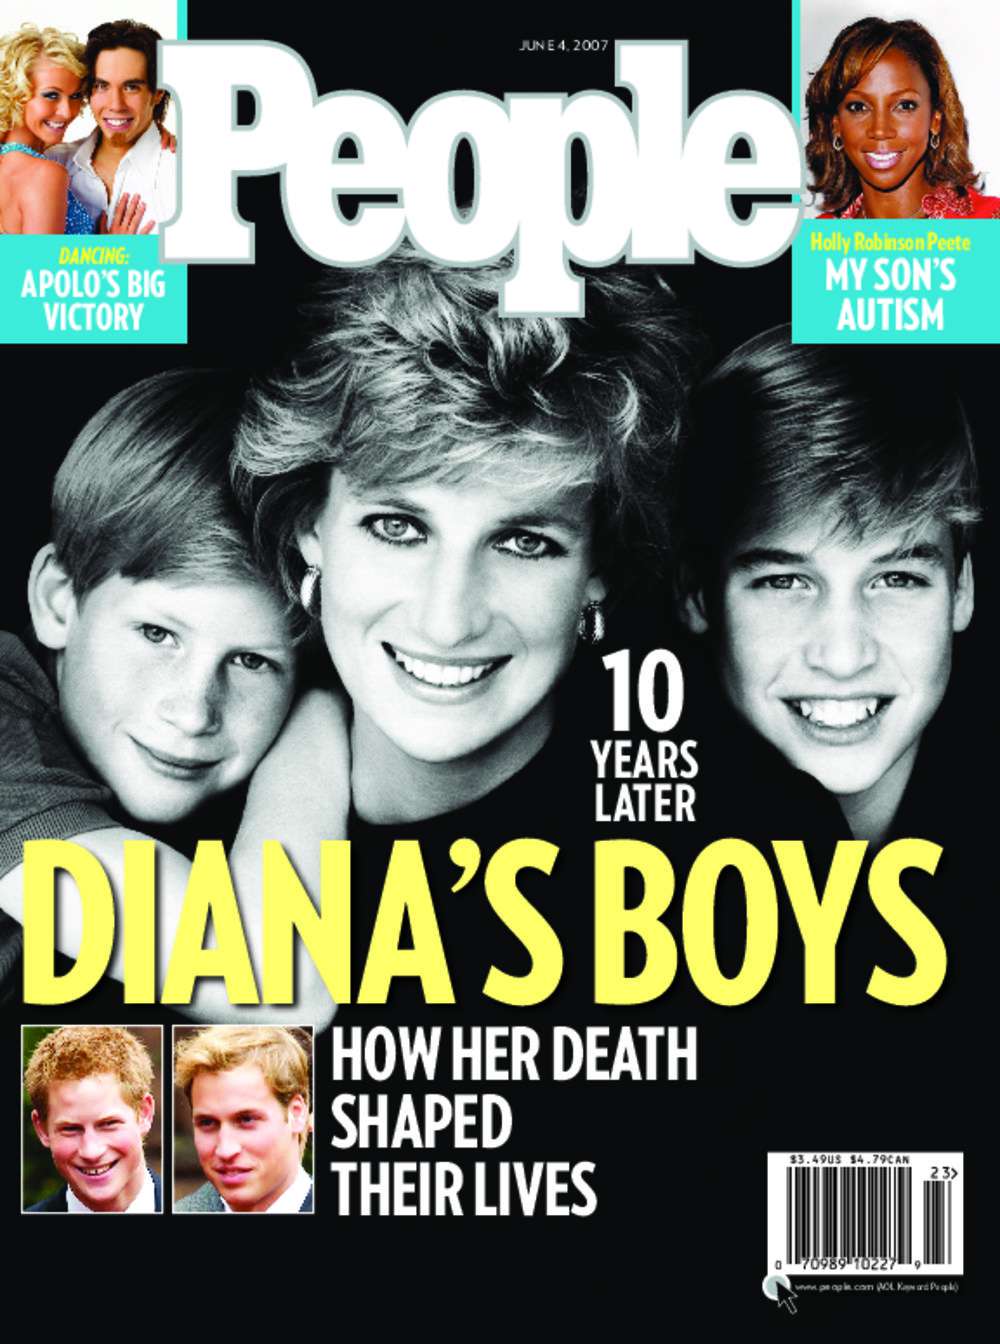 Princess Diana on the cover of People Magazine